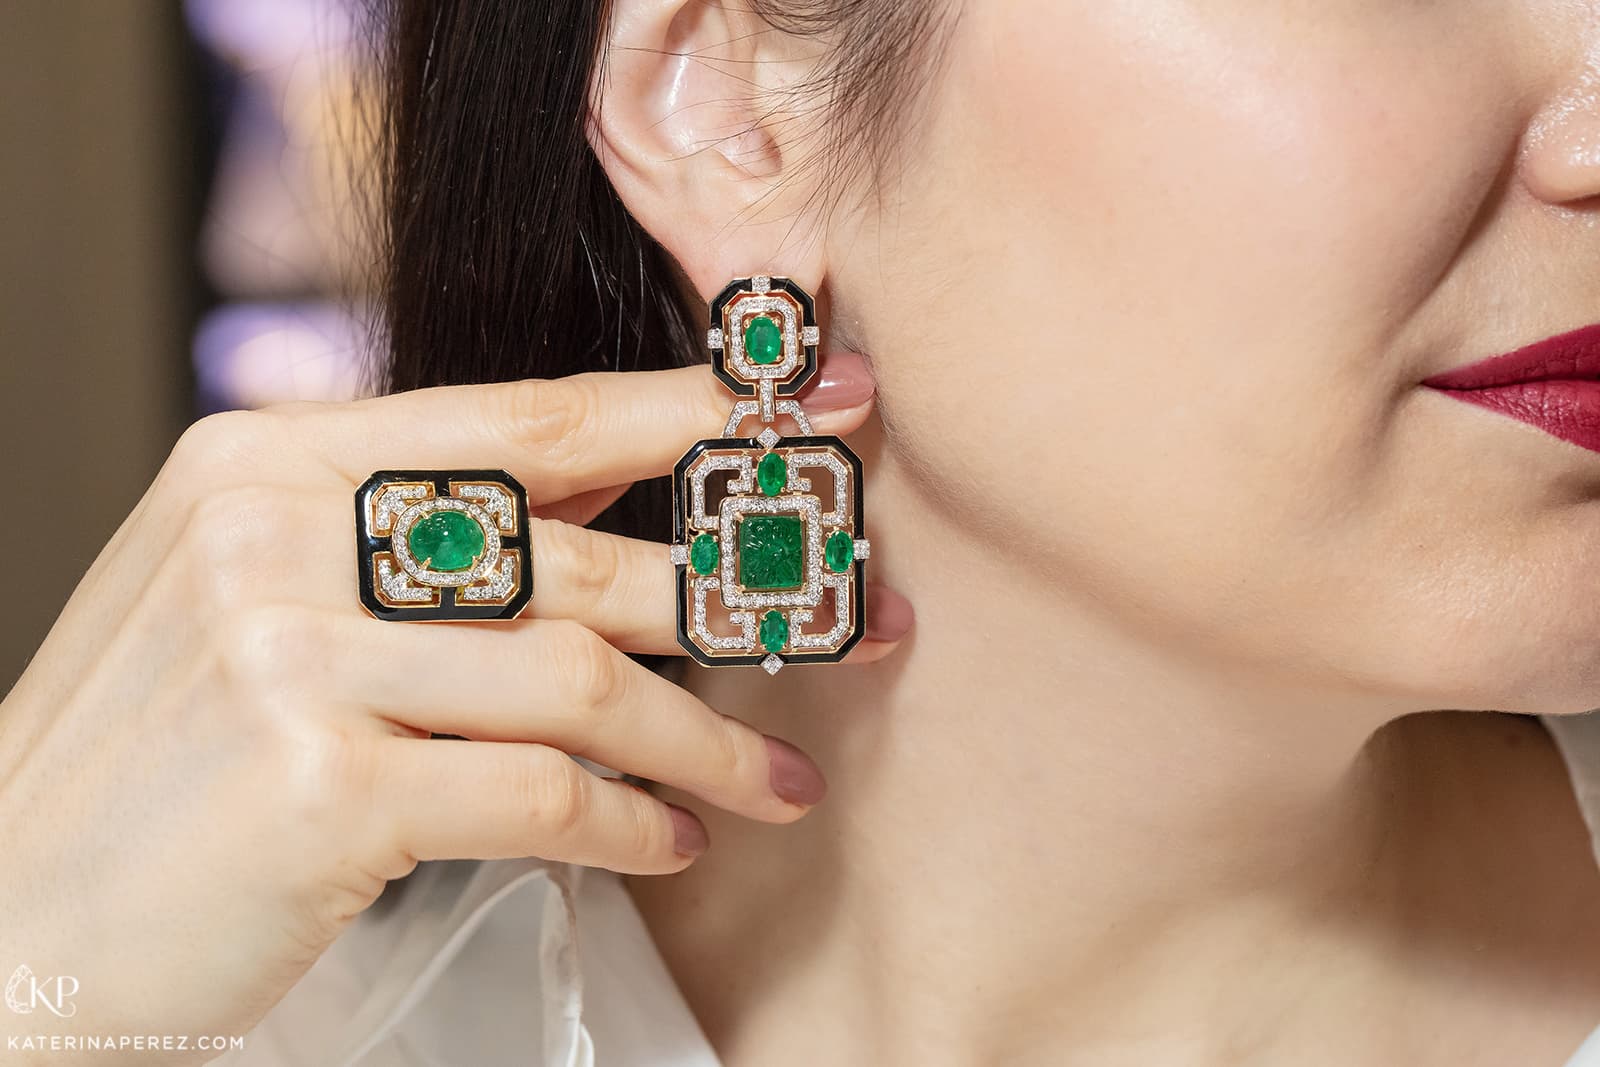 Exquisite Fine Jewellery earrings and ring with emeralds, diamonds and enamel in yellow gold